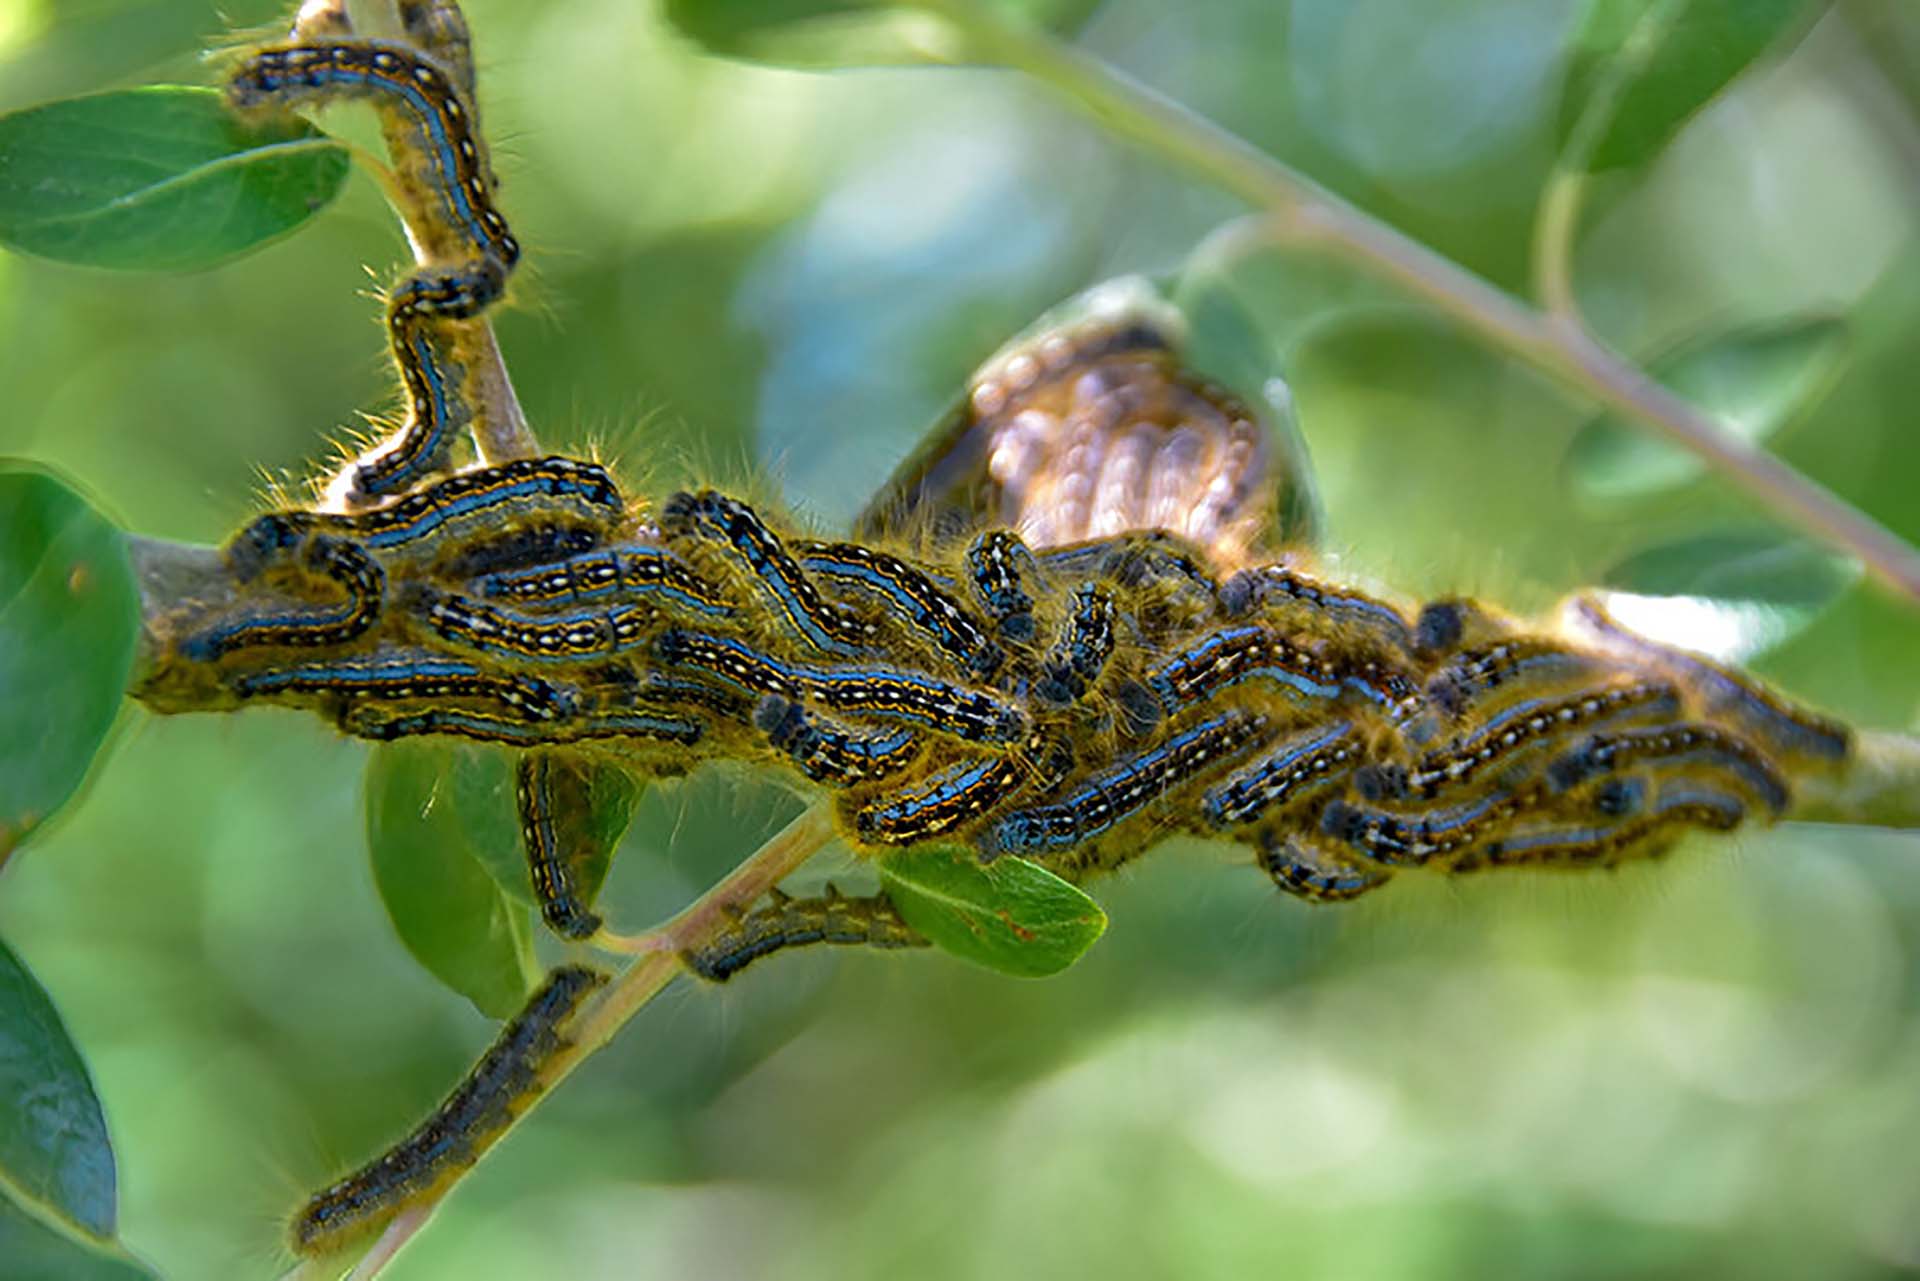 Dozens of caterpillars occupying a green branch